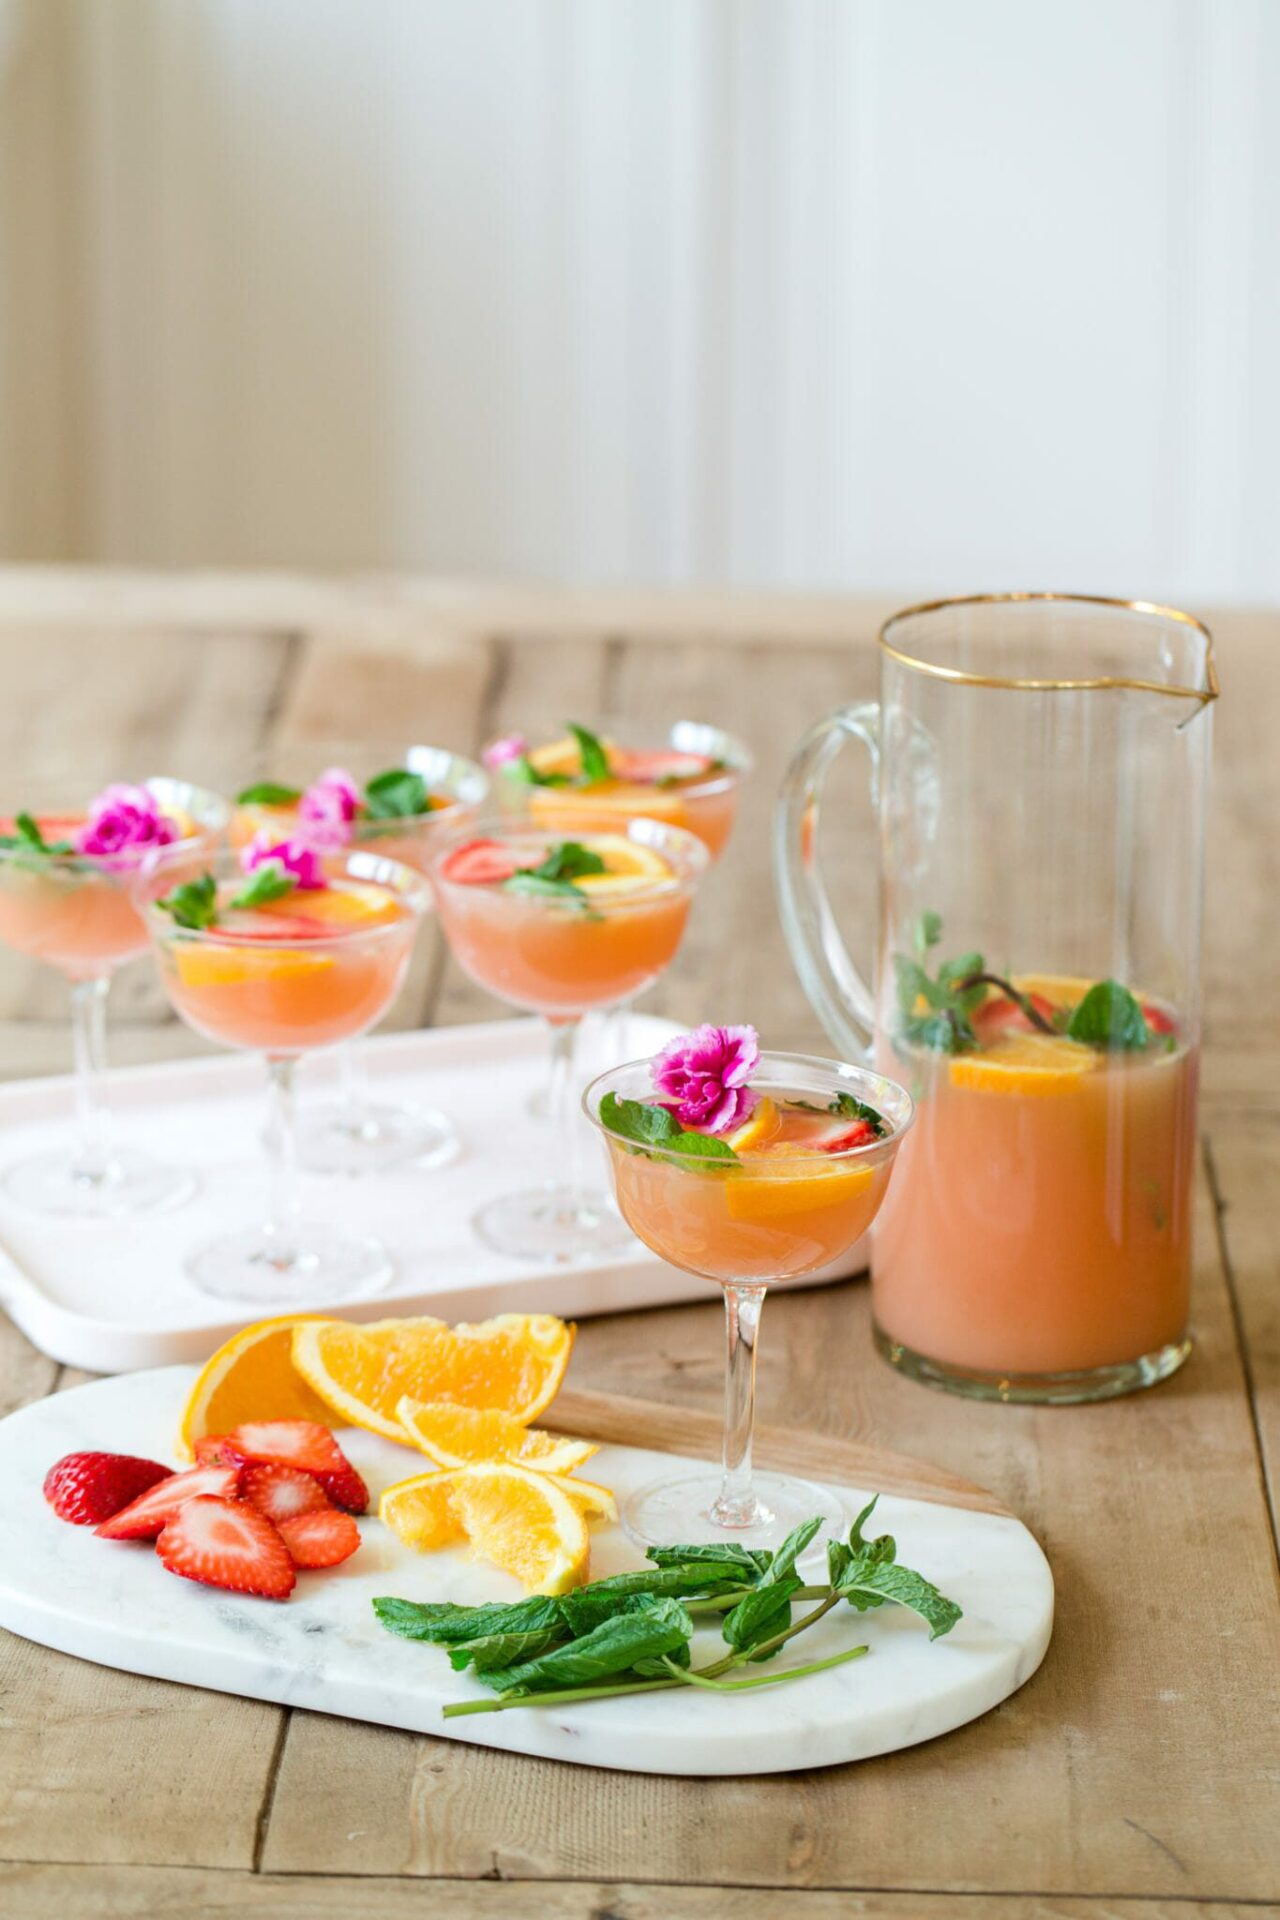 Brunch Punch Champagne Cocktail | homemade cocktail recipes | summer cocktails | easy cocktail recipes | brunch drink recipes || JennyCookies.com #recipe #brunch #cocktail #champagnecocktail #drinkrecipes #summerdrinks #summercocktail #jennycookies